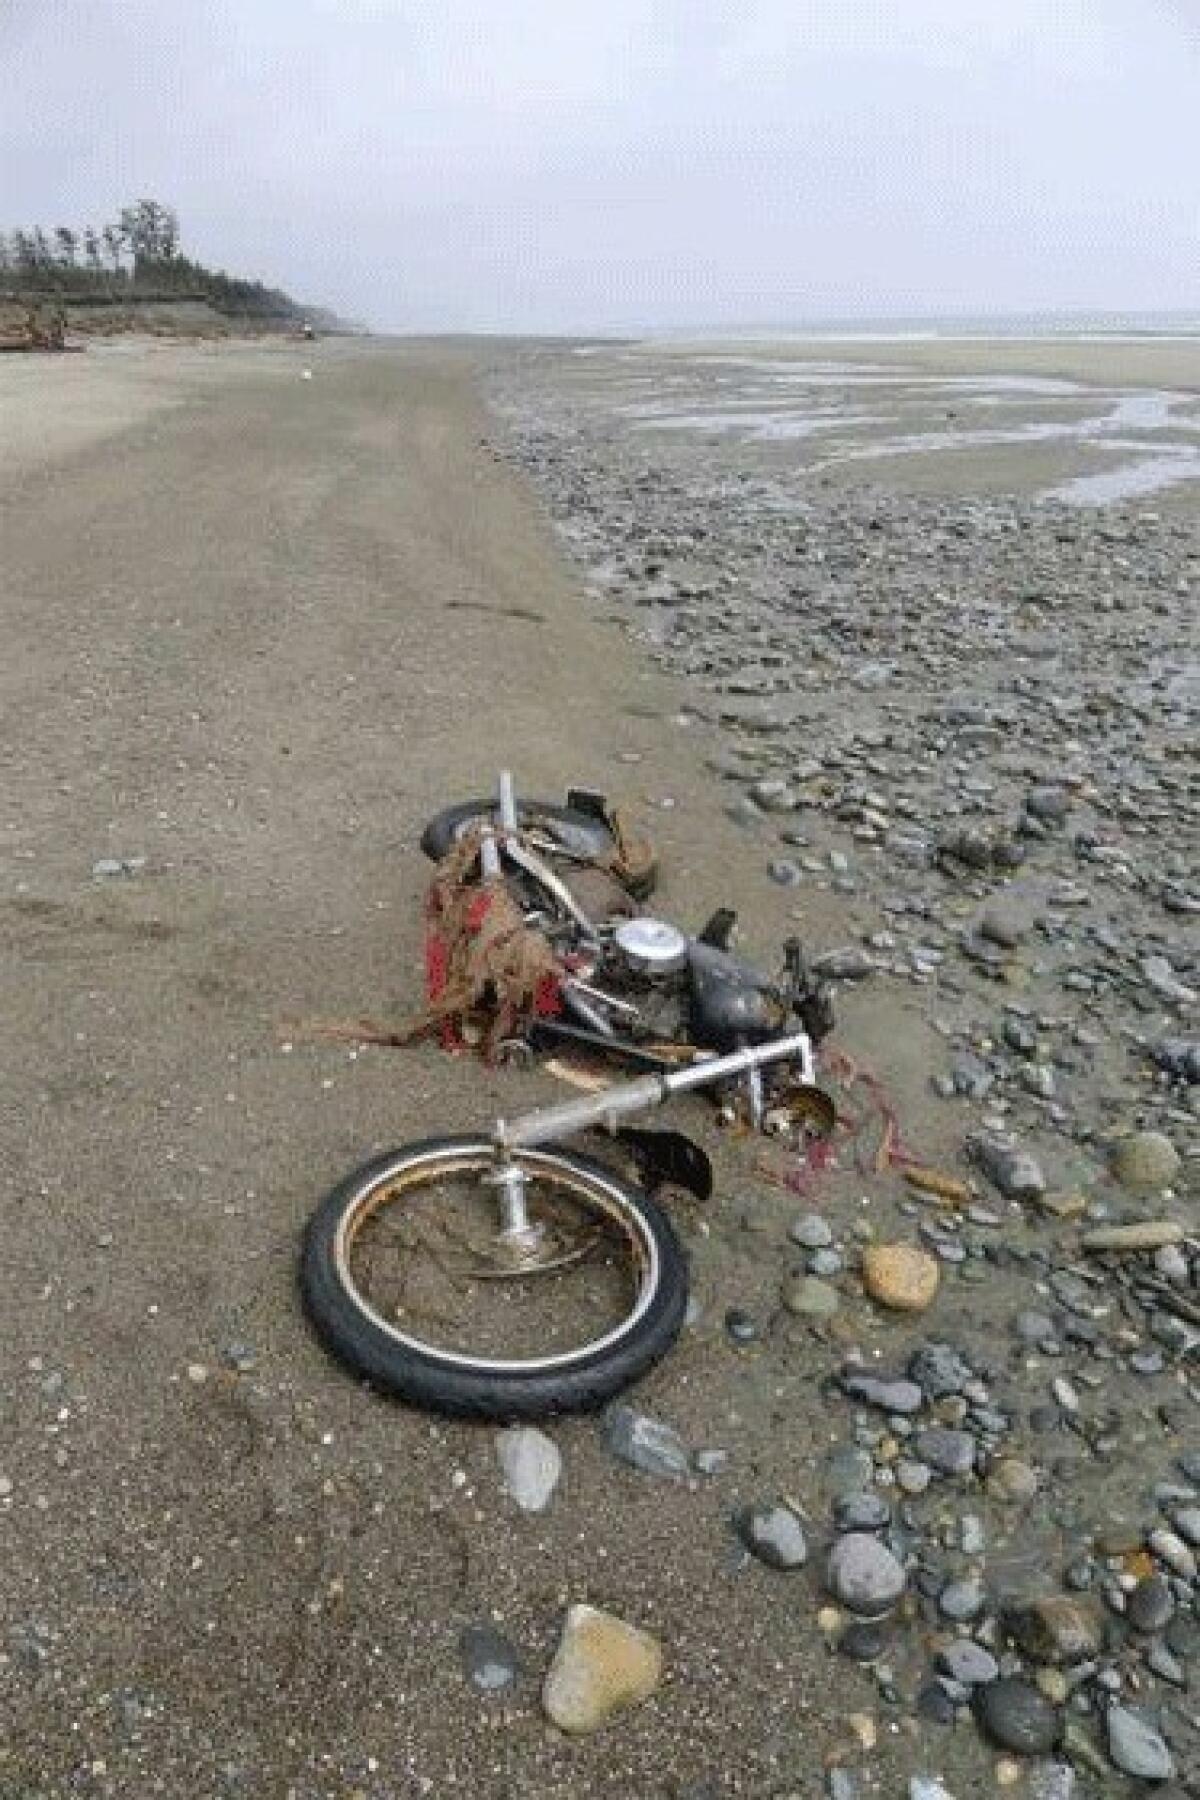 A rusting Harley-Davidson from Miyagi prefecture, Japan, was discovered on a remote beach in British Columbia in late April and photographed May 2.